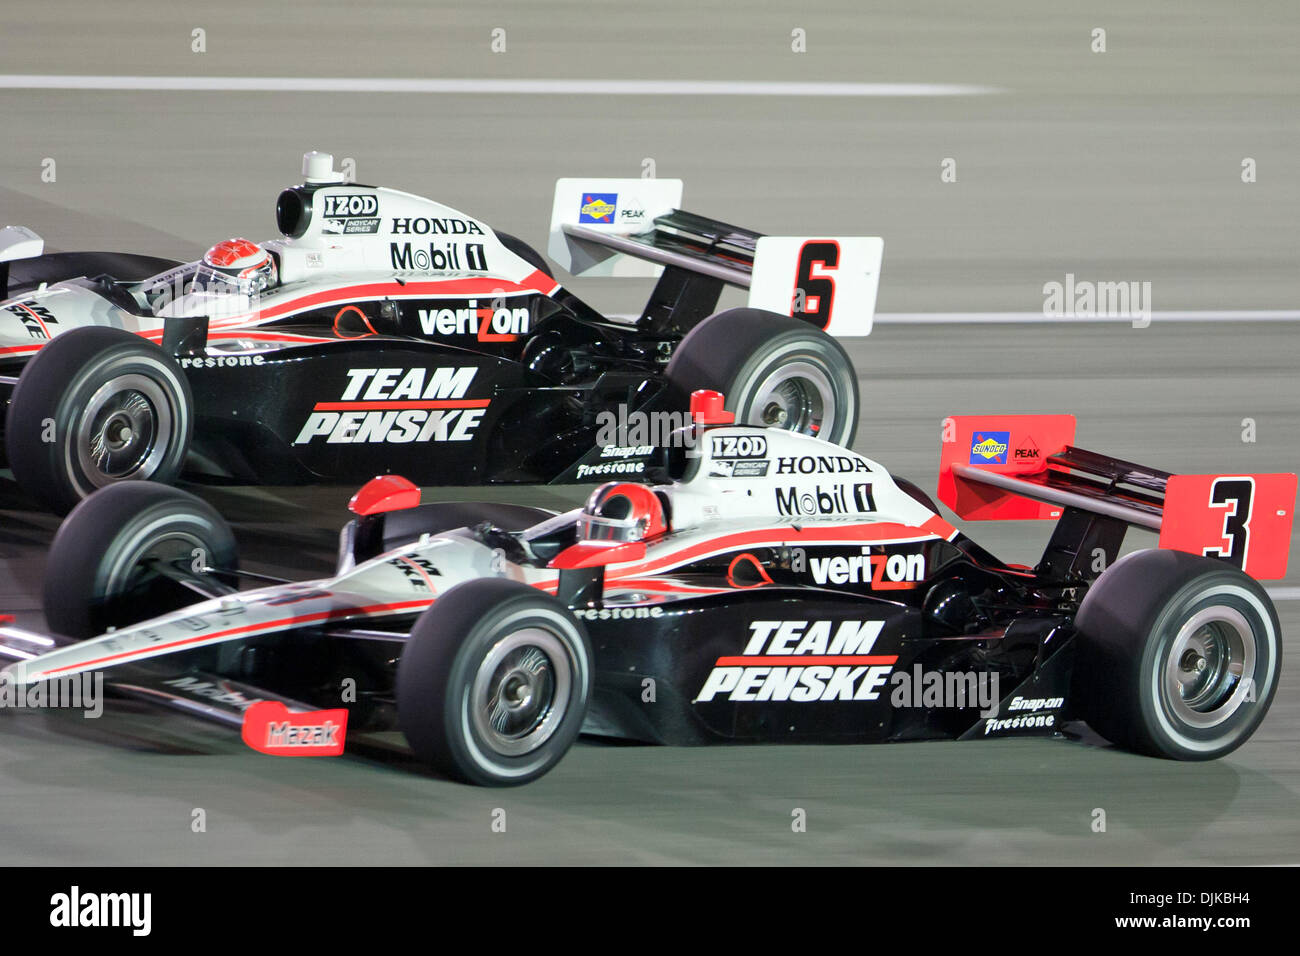 Sep. 04, 2010 - Sparta, Kentucky, United States of America - Ryan Briscoe (#6 Team Penske) and Helio Castroneves (#3 Team Penske) run side-by-side during the IZOD IndyCar Series Kentucky Indy 300 at the Kentucky Speedway in Sparta, KY.  Helio Castroneves (#3 Team Penske) won the race and Ryan Briscoe (#6 Team Penske) finished 24th. (Credit Image: © Frank Jamsky/Southcreek Global/ZU Stock Photo